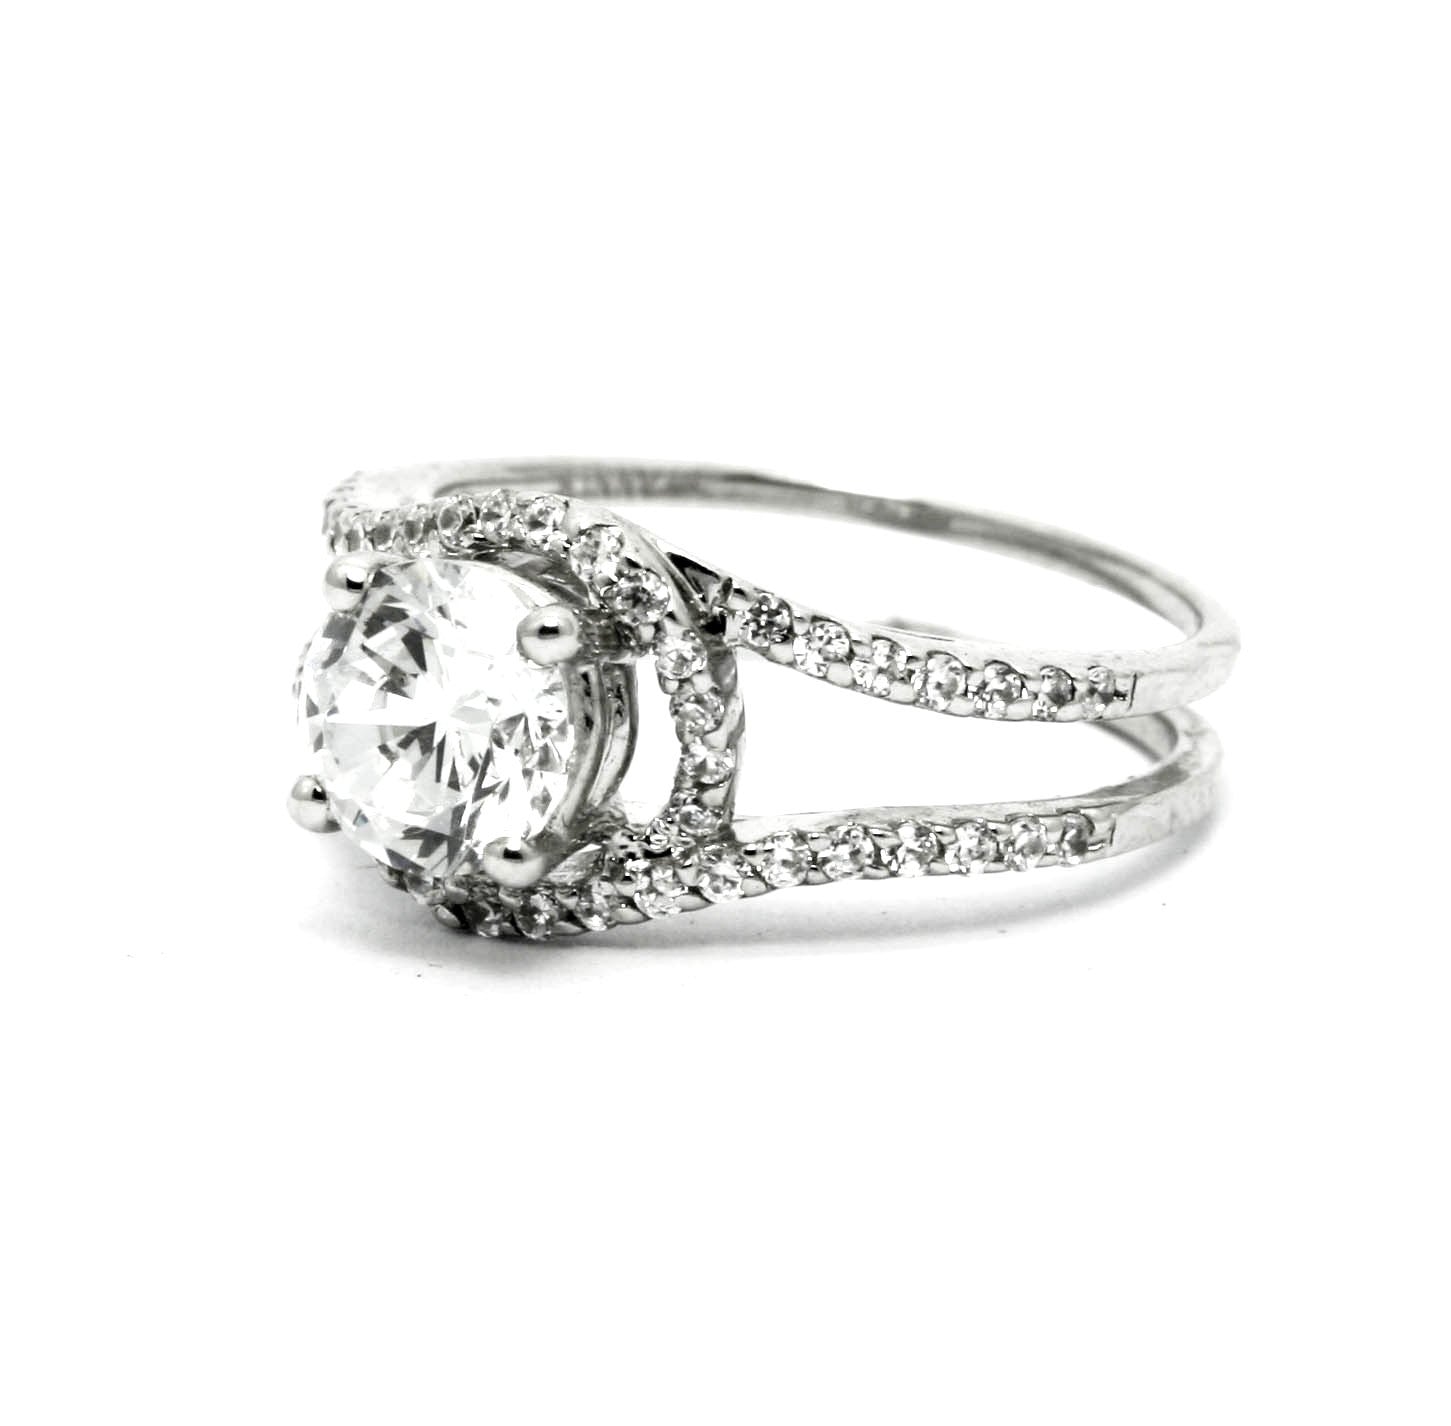 Unique 1.25 Carat (7 mm) Forever Brilliant Moissanite Floating Halo Engagement Ring With .47 Carat White Diamonds, Split Shank - FBY11580SE